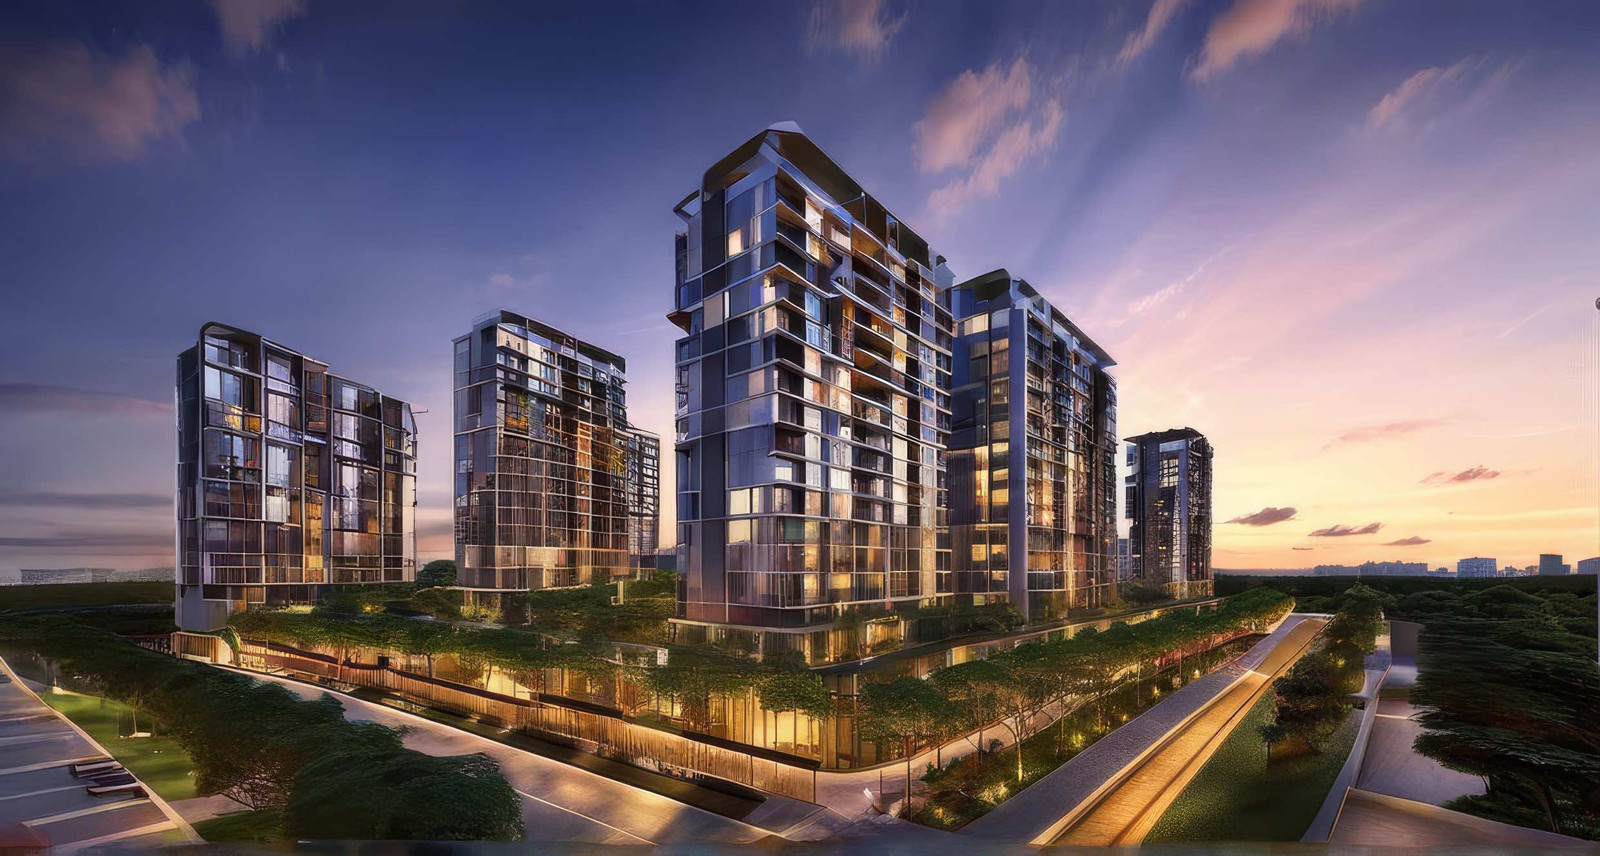 champions way residences is brand new development located in district 25 singapore comprising of